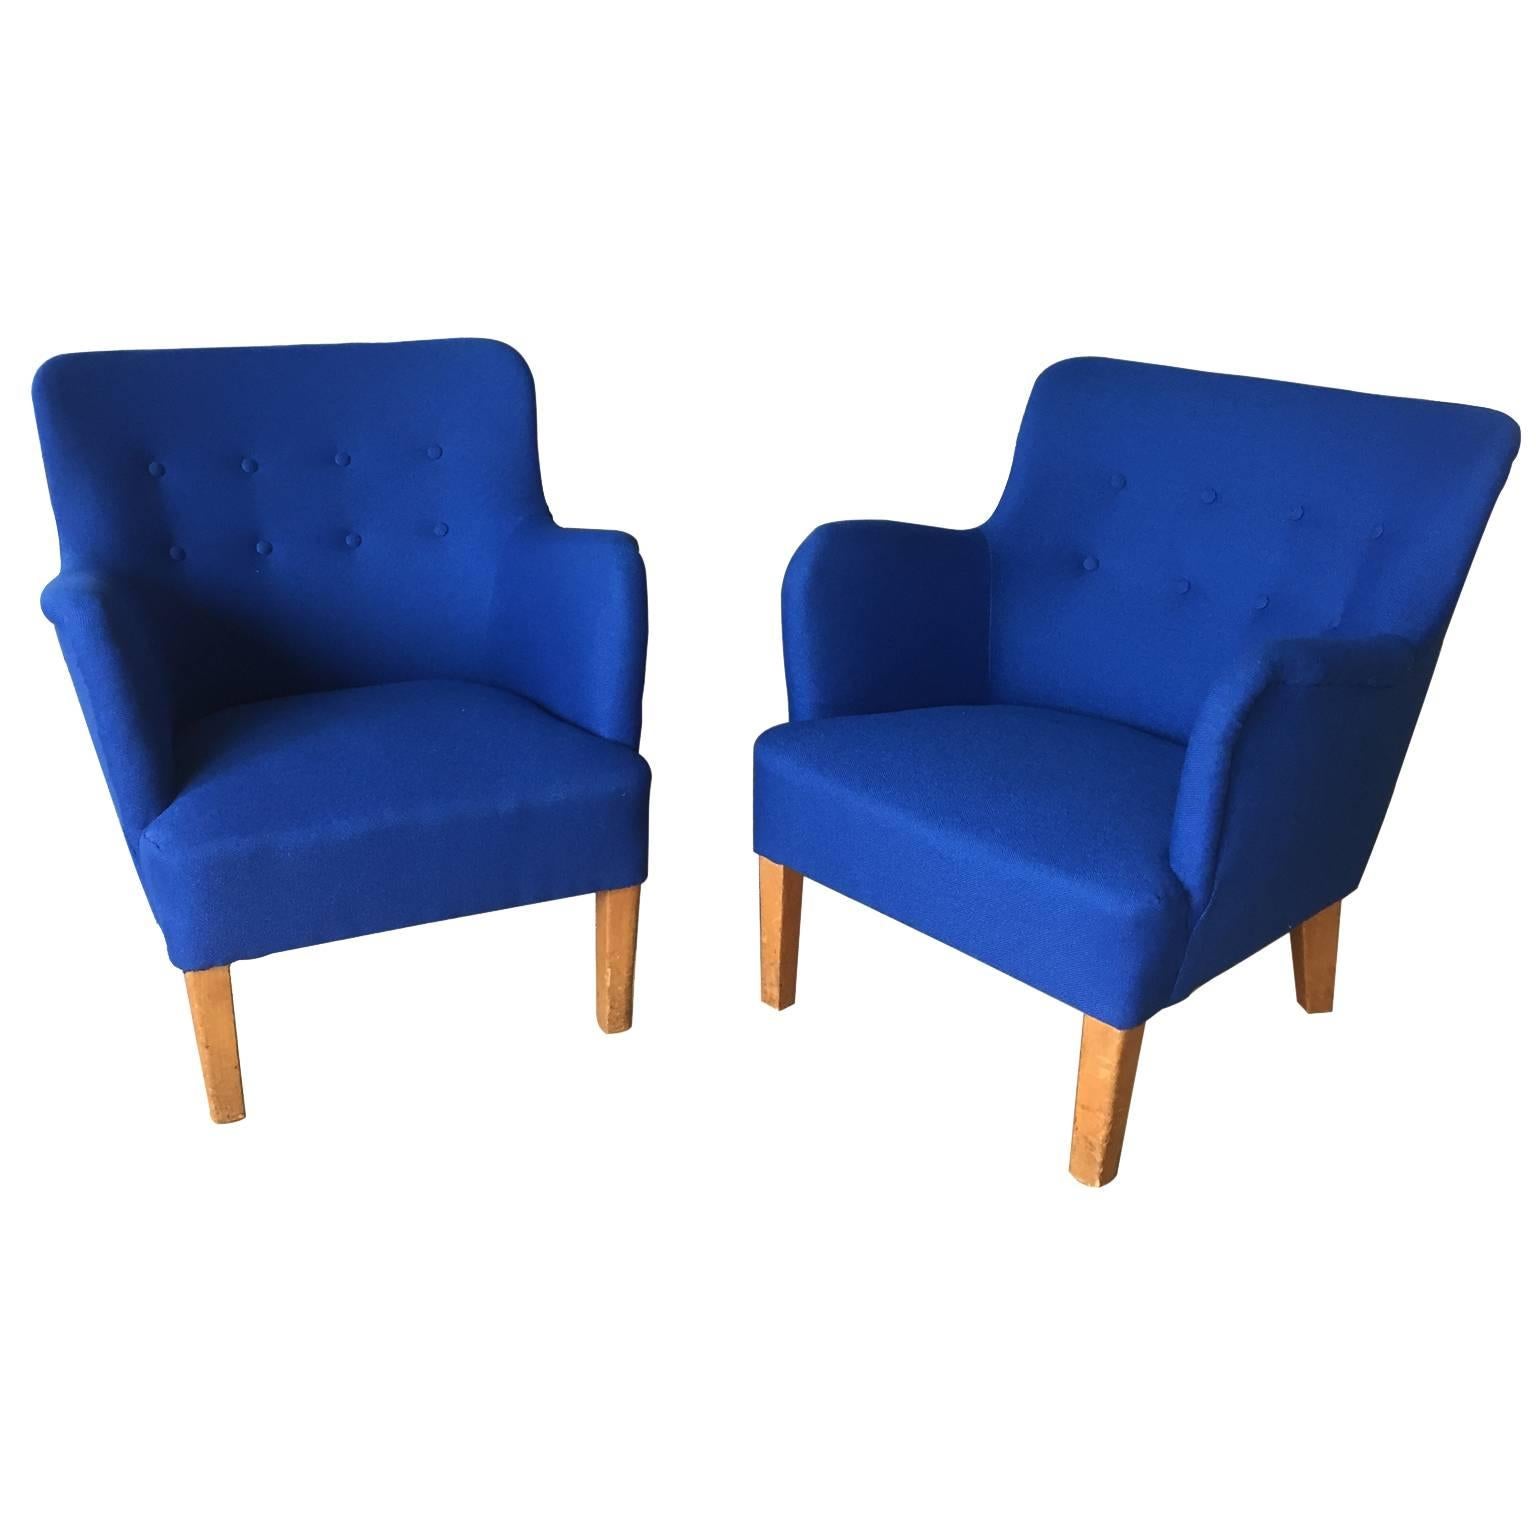 Pair of Peter Hvidt Armchairs, Produced by Fritz Hansen For Sale